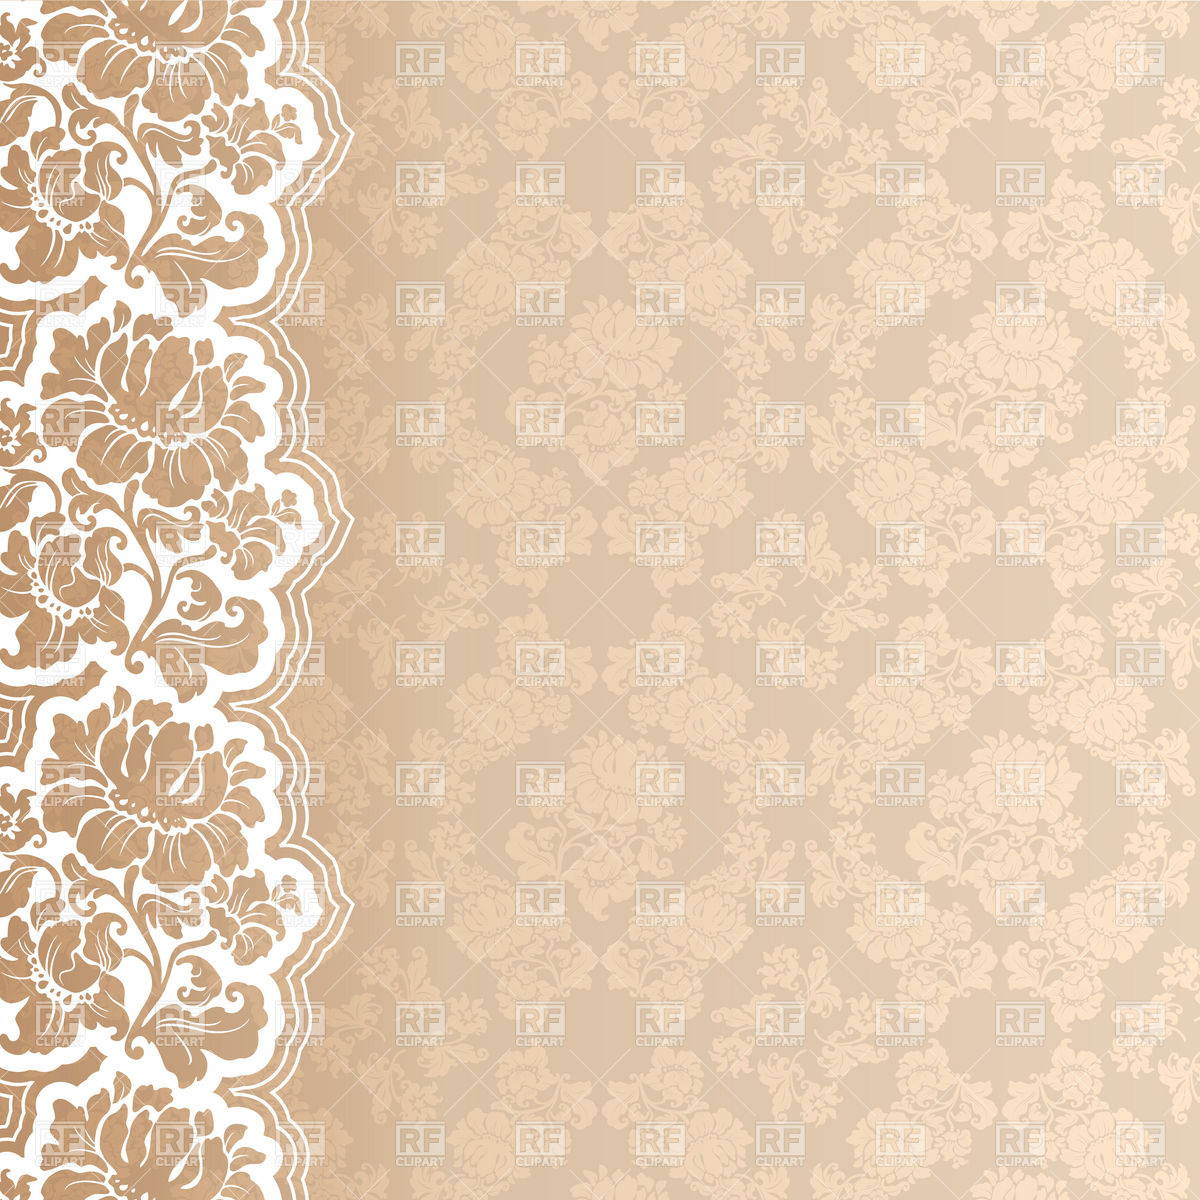 Floral Victorian Wallpaper With Lace Border Background